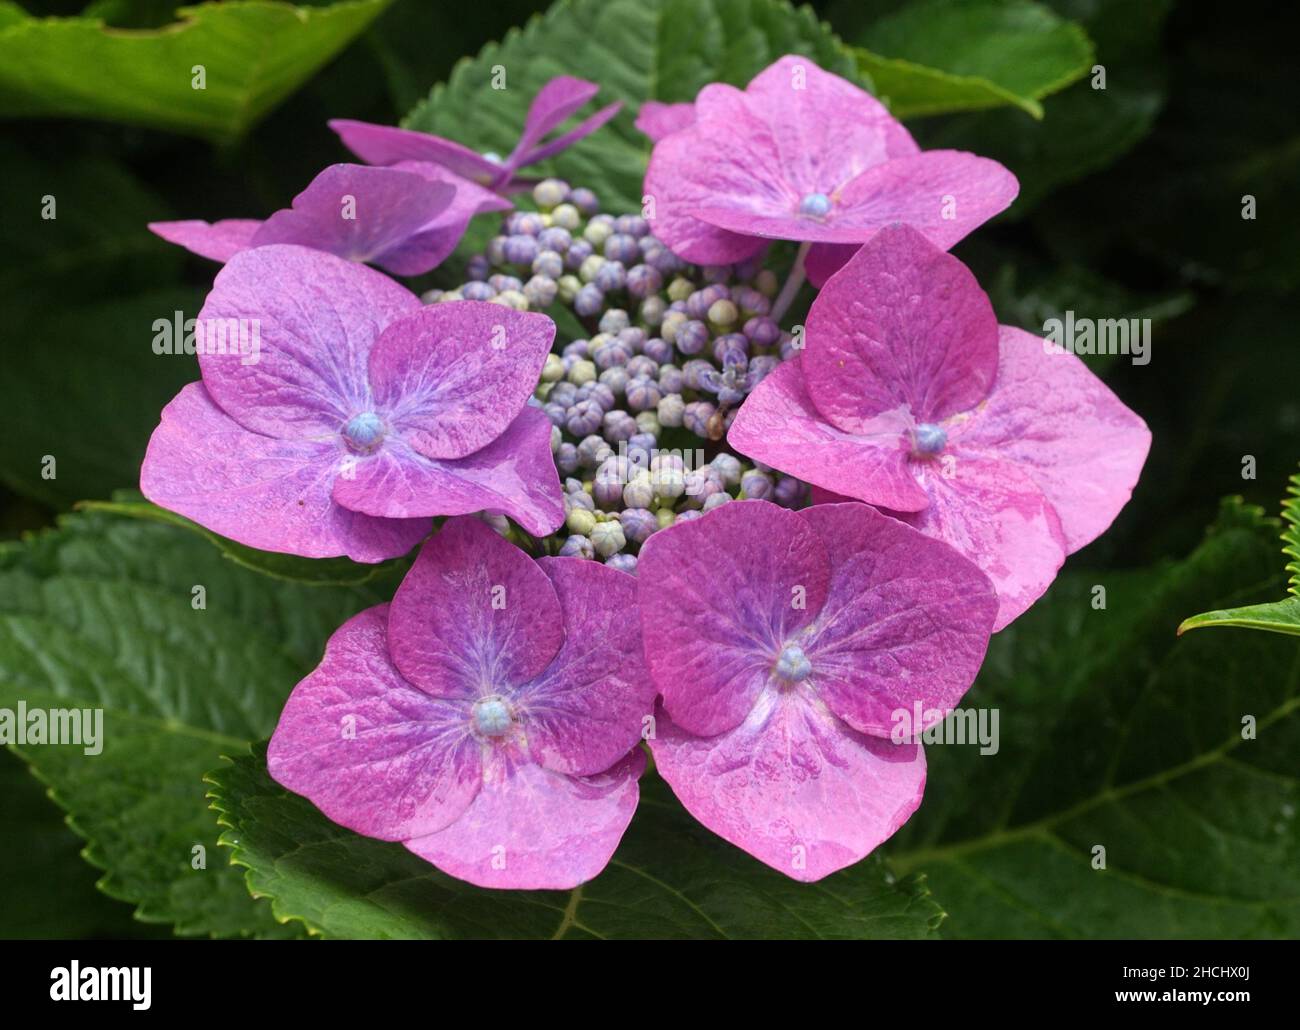 Lovely flower of a pink hydrangea serrata cultivar. Common names of this shrub are mountain hydrangea and tea of heaven. Stock Photo